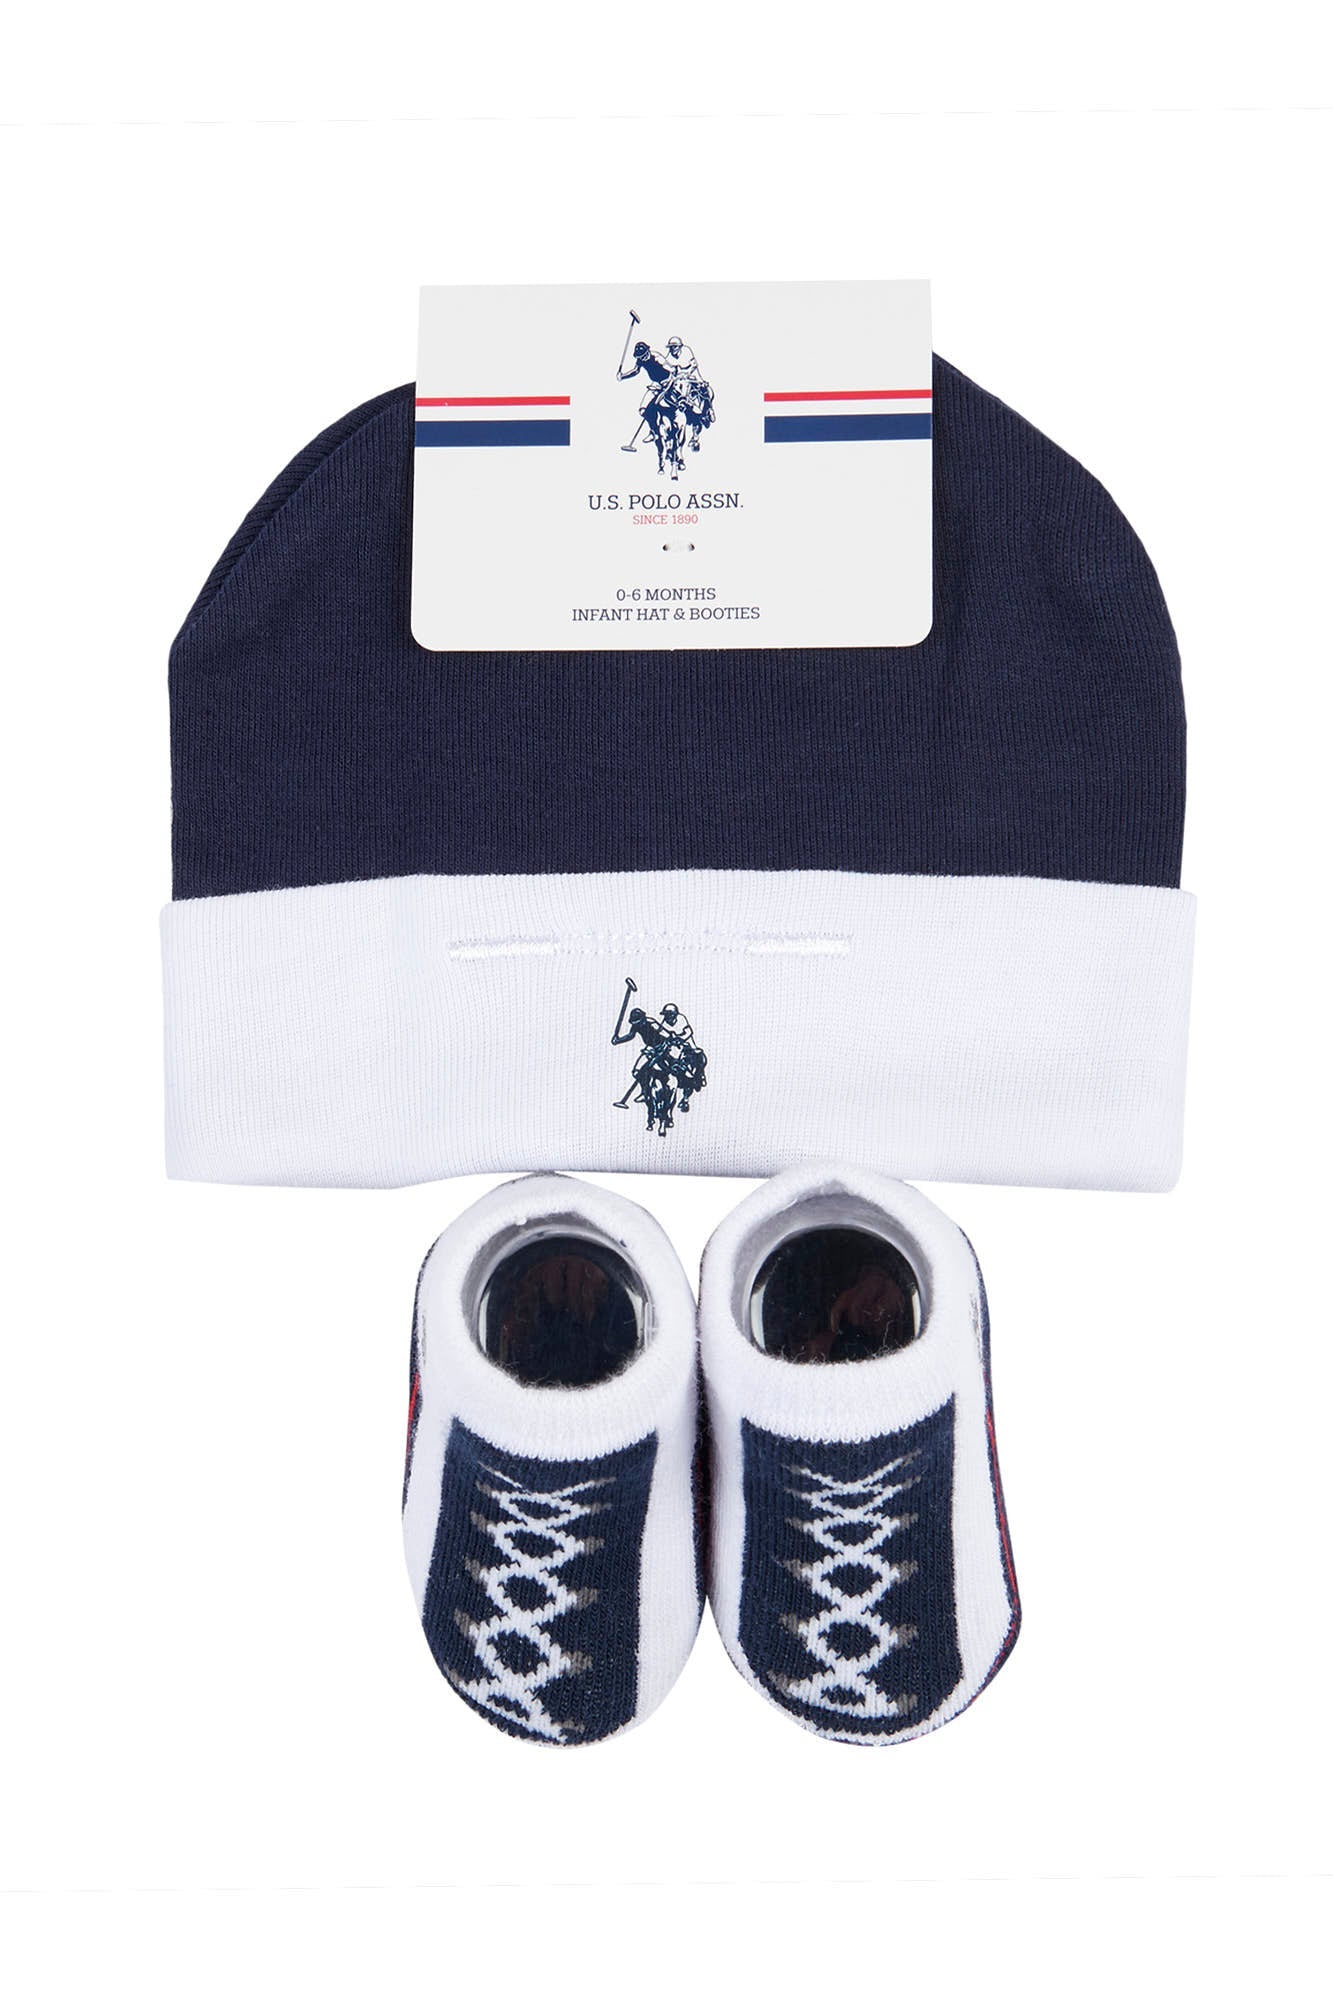 U.S. Polo Assn. Baby 2 Piece Gifting Set in Navy